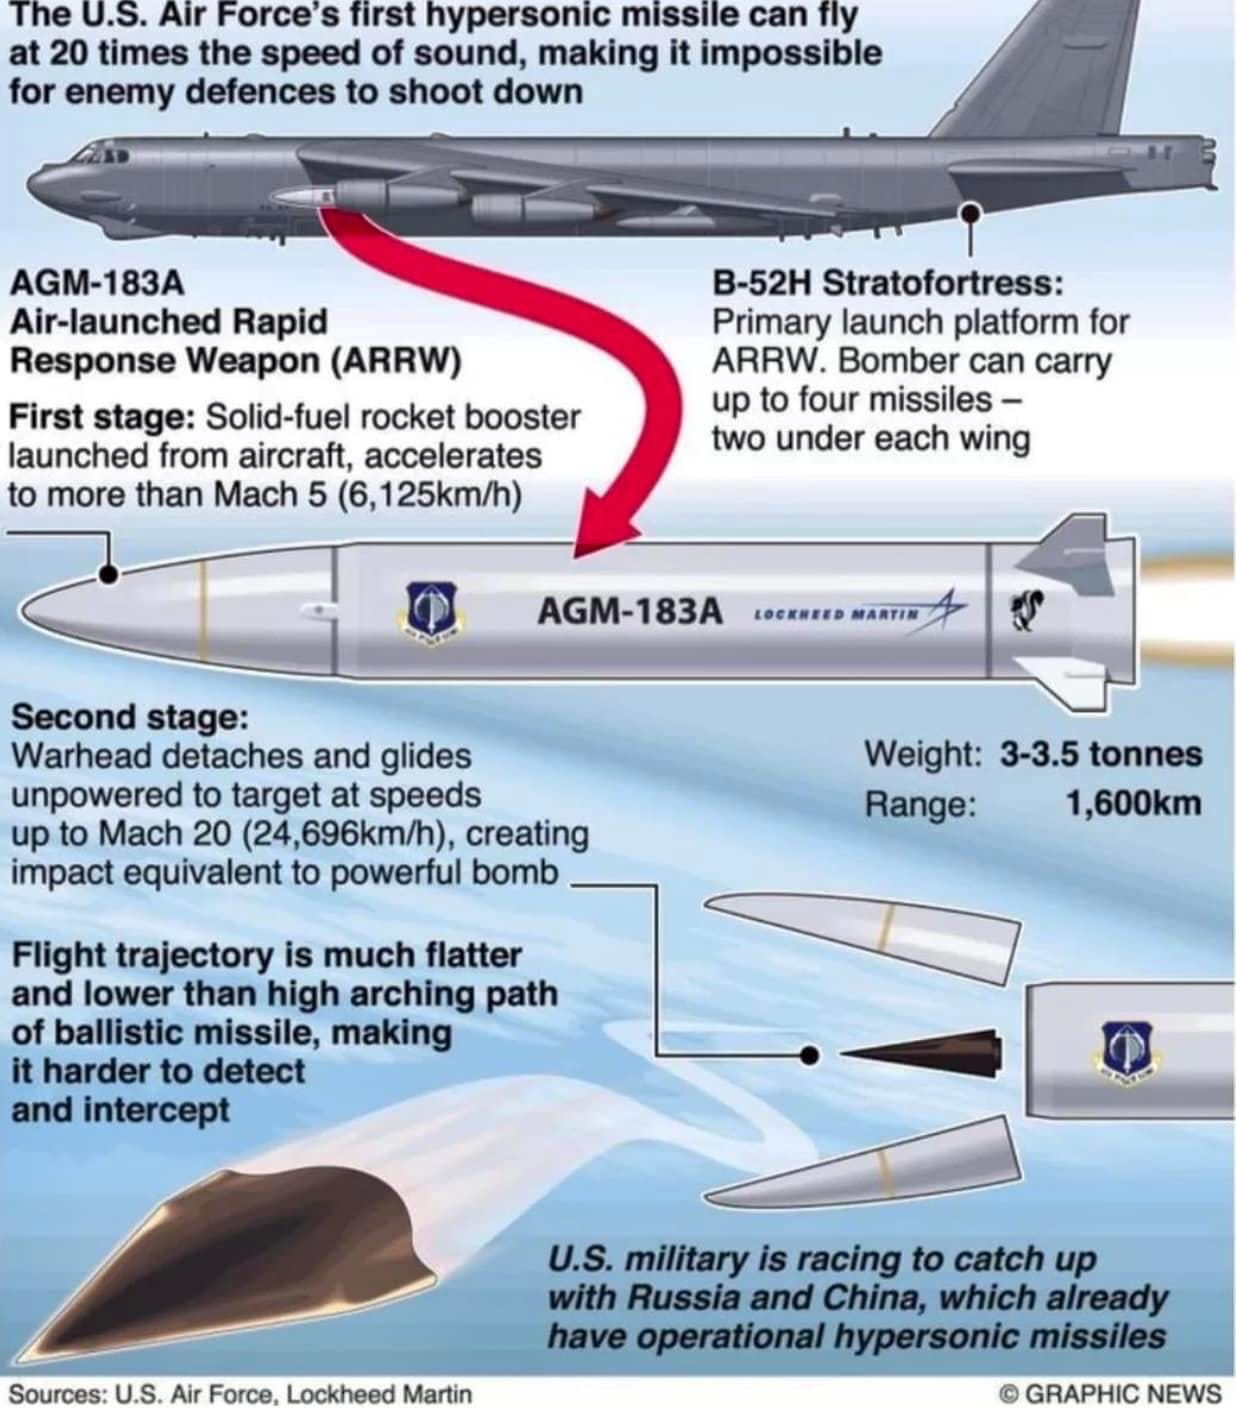 Chris Bolton on Twitter: "AGM-183 ARRW ("Air-Launched Rapid Response  Weapon") hypersonic air-to-ground missile planned for use by the USAF  Developed by Lockheed Martin, the boost-glide vehicle is propelled to a  maximum speed